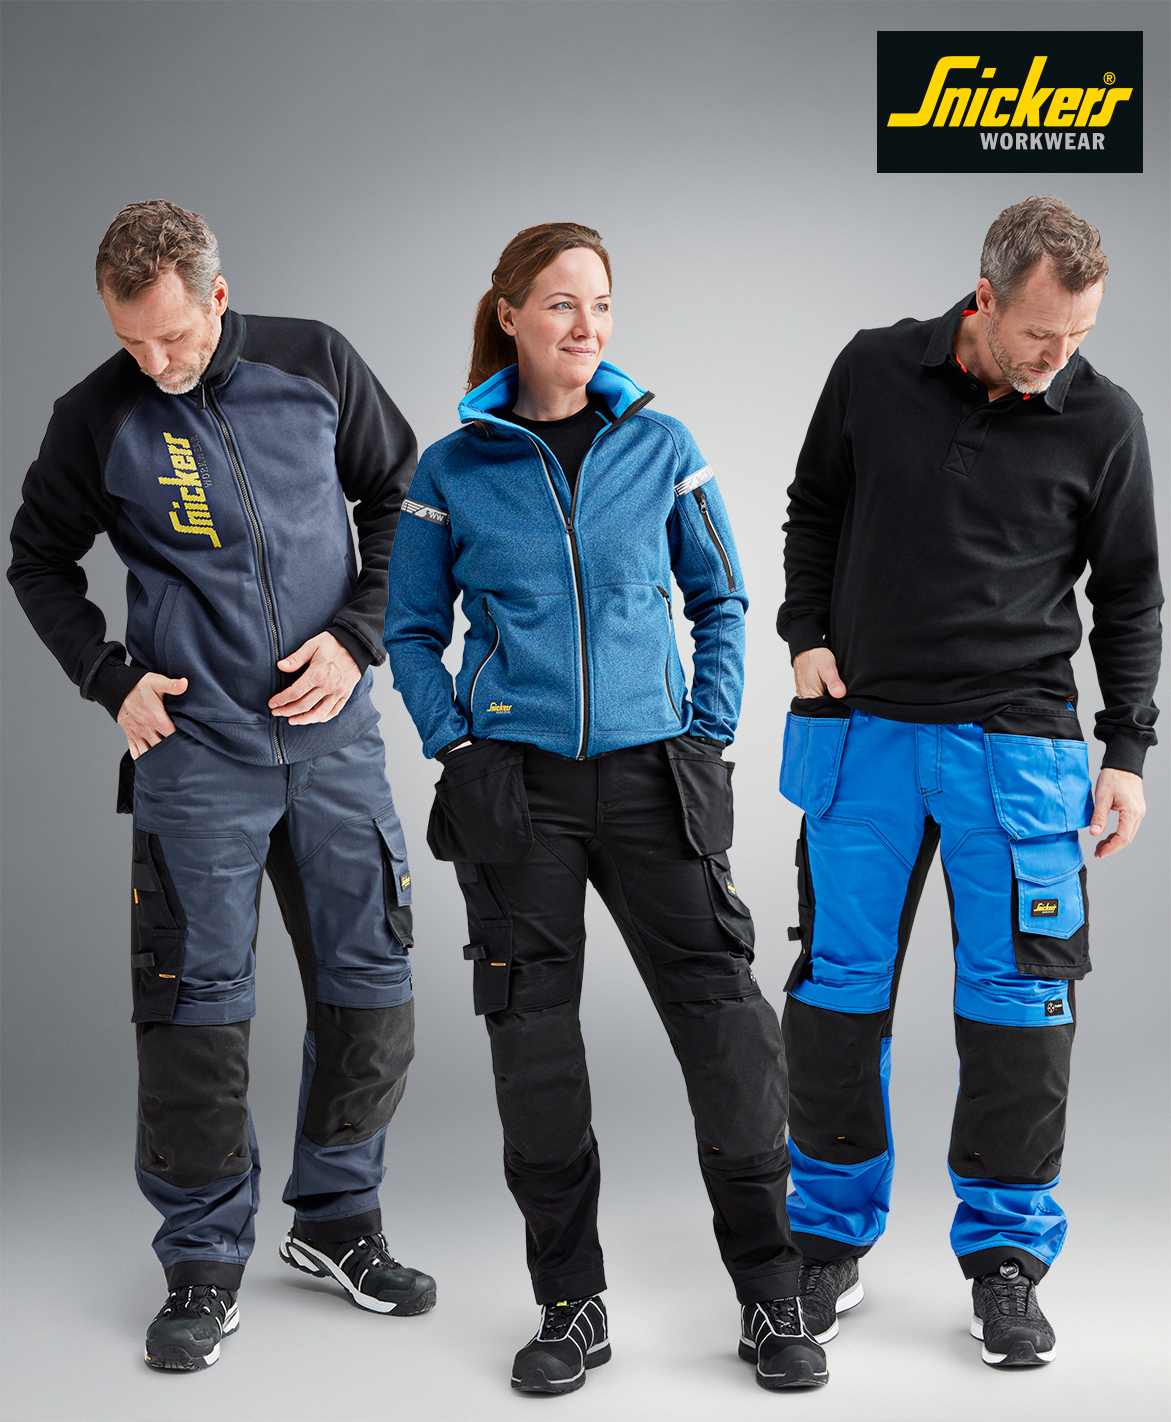 Snickers Workwear’s NEW Loose-fit Stretch Trousers for Maximum Mobility On-site